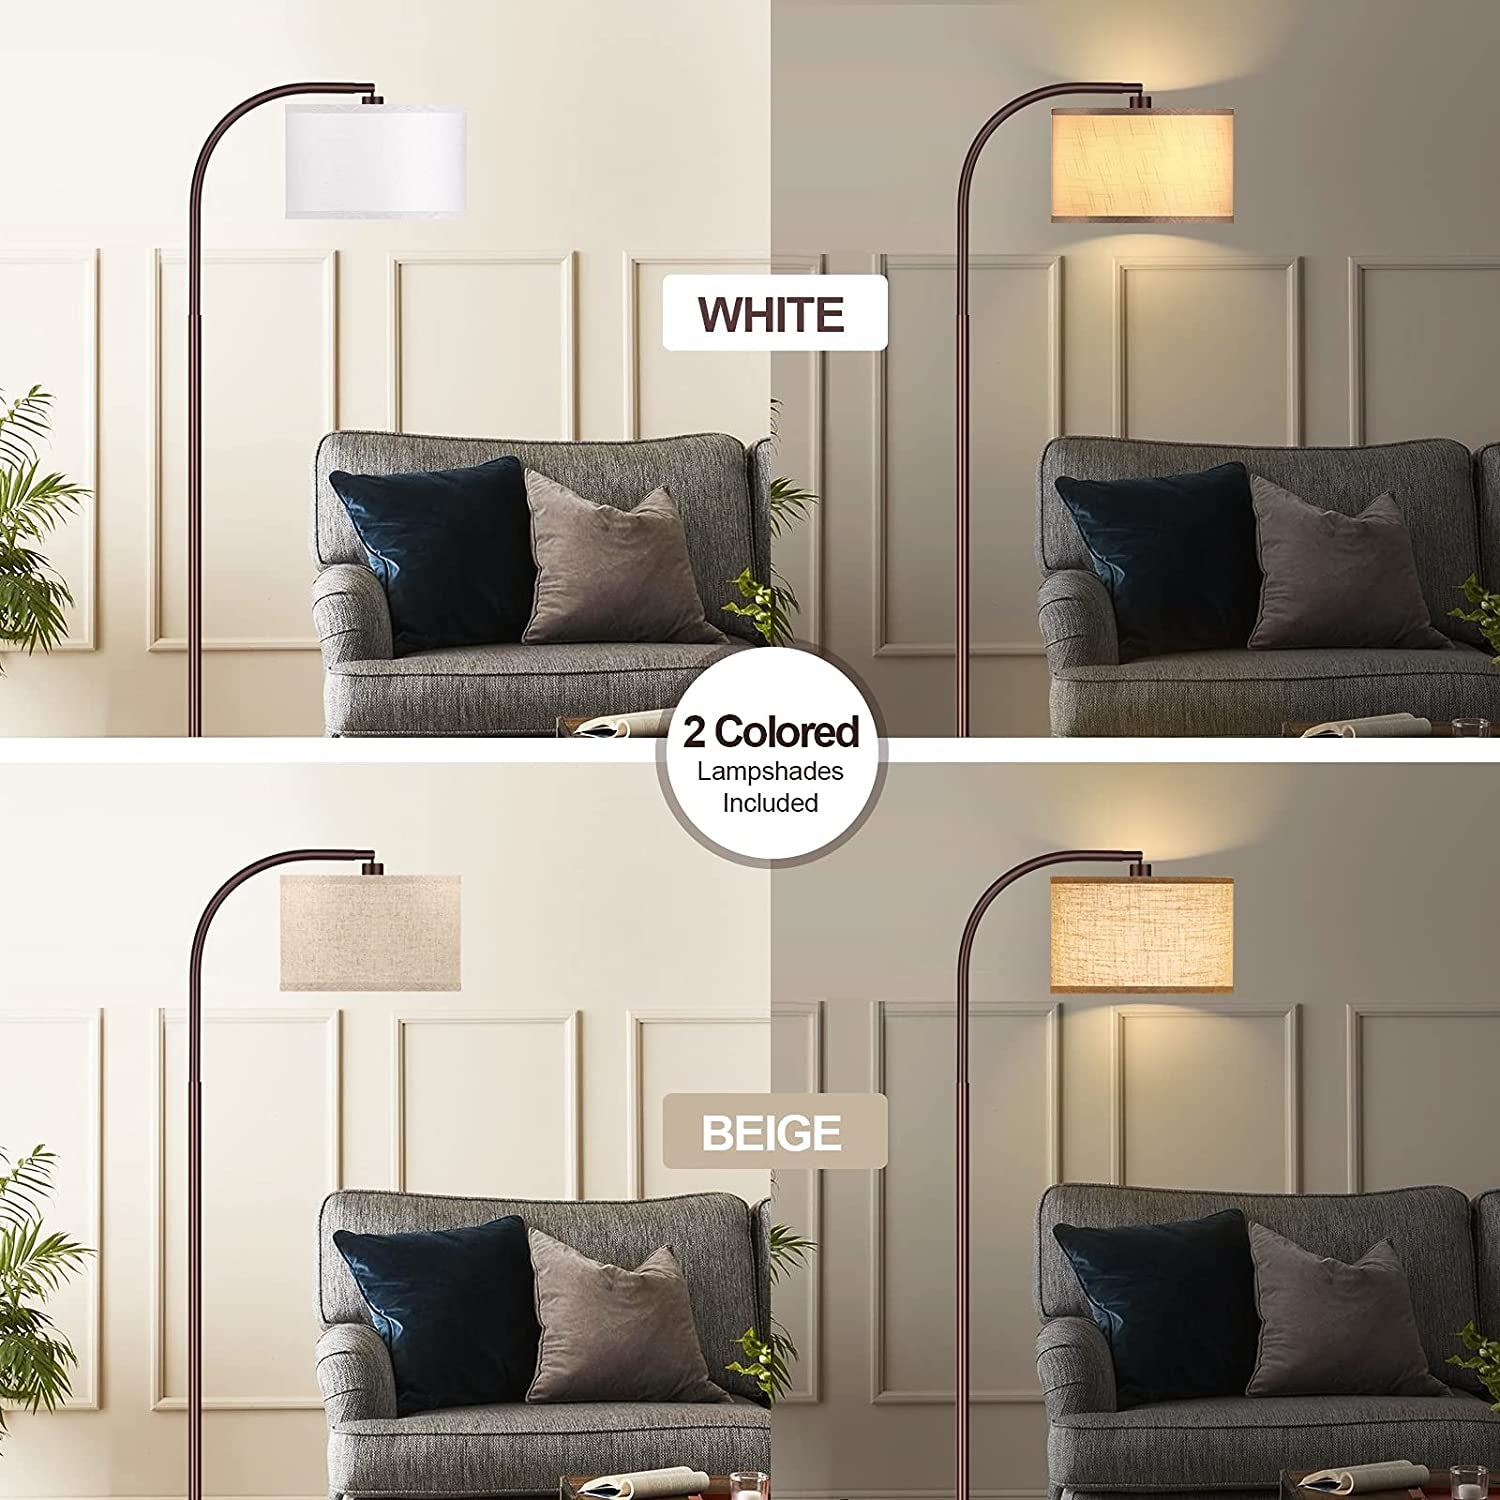 "Modern Adjustable Floor Lamp for Bedroom Study -  Floor Lamp with 2 Lamp Shades (Beige/White), Oil-Rubbed Bronze LED Standing Lamp, Classic Tall Reading Pole Lamp with LED Bulb for Living Room"